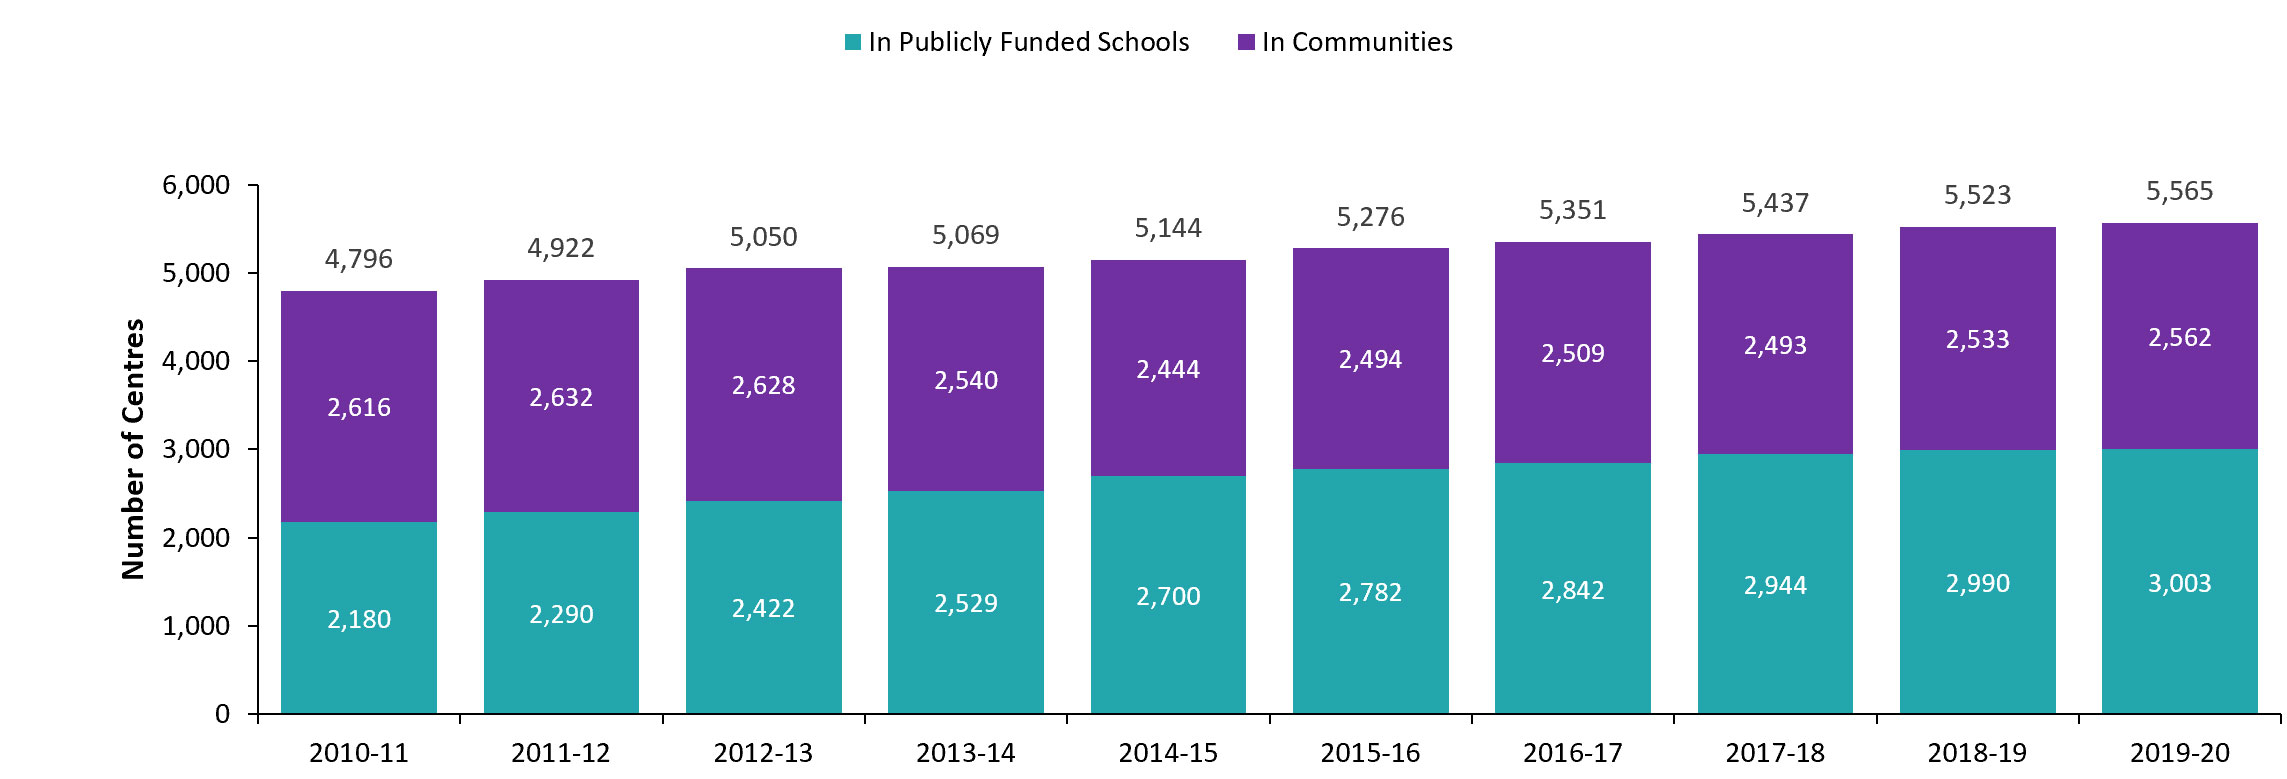 Licensed child care centres in publicly funded schools and in communities, 2010‑11 to 2019‑20